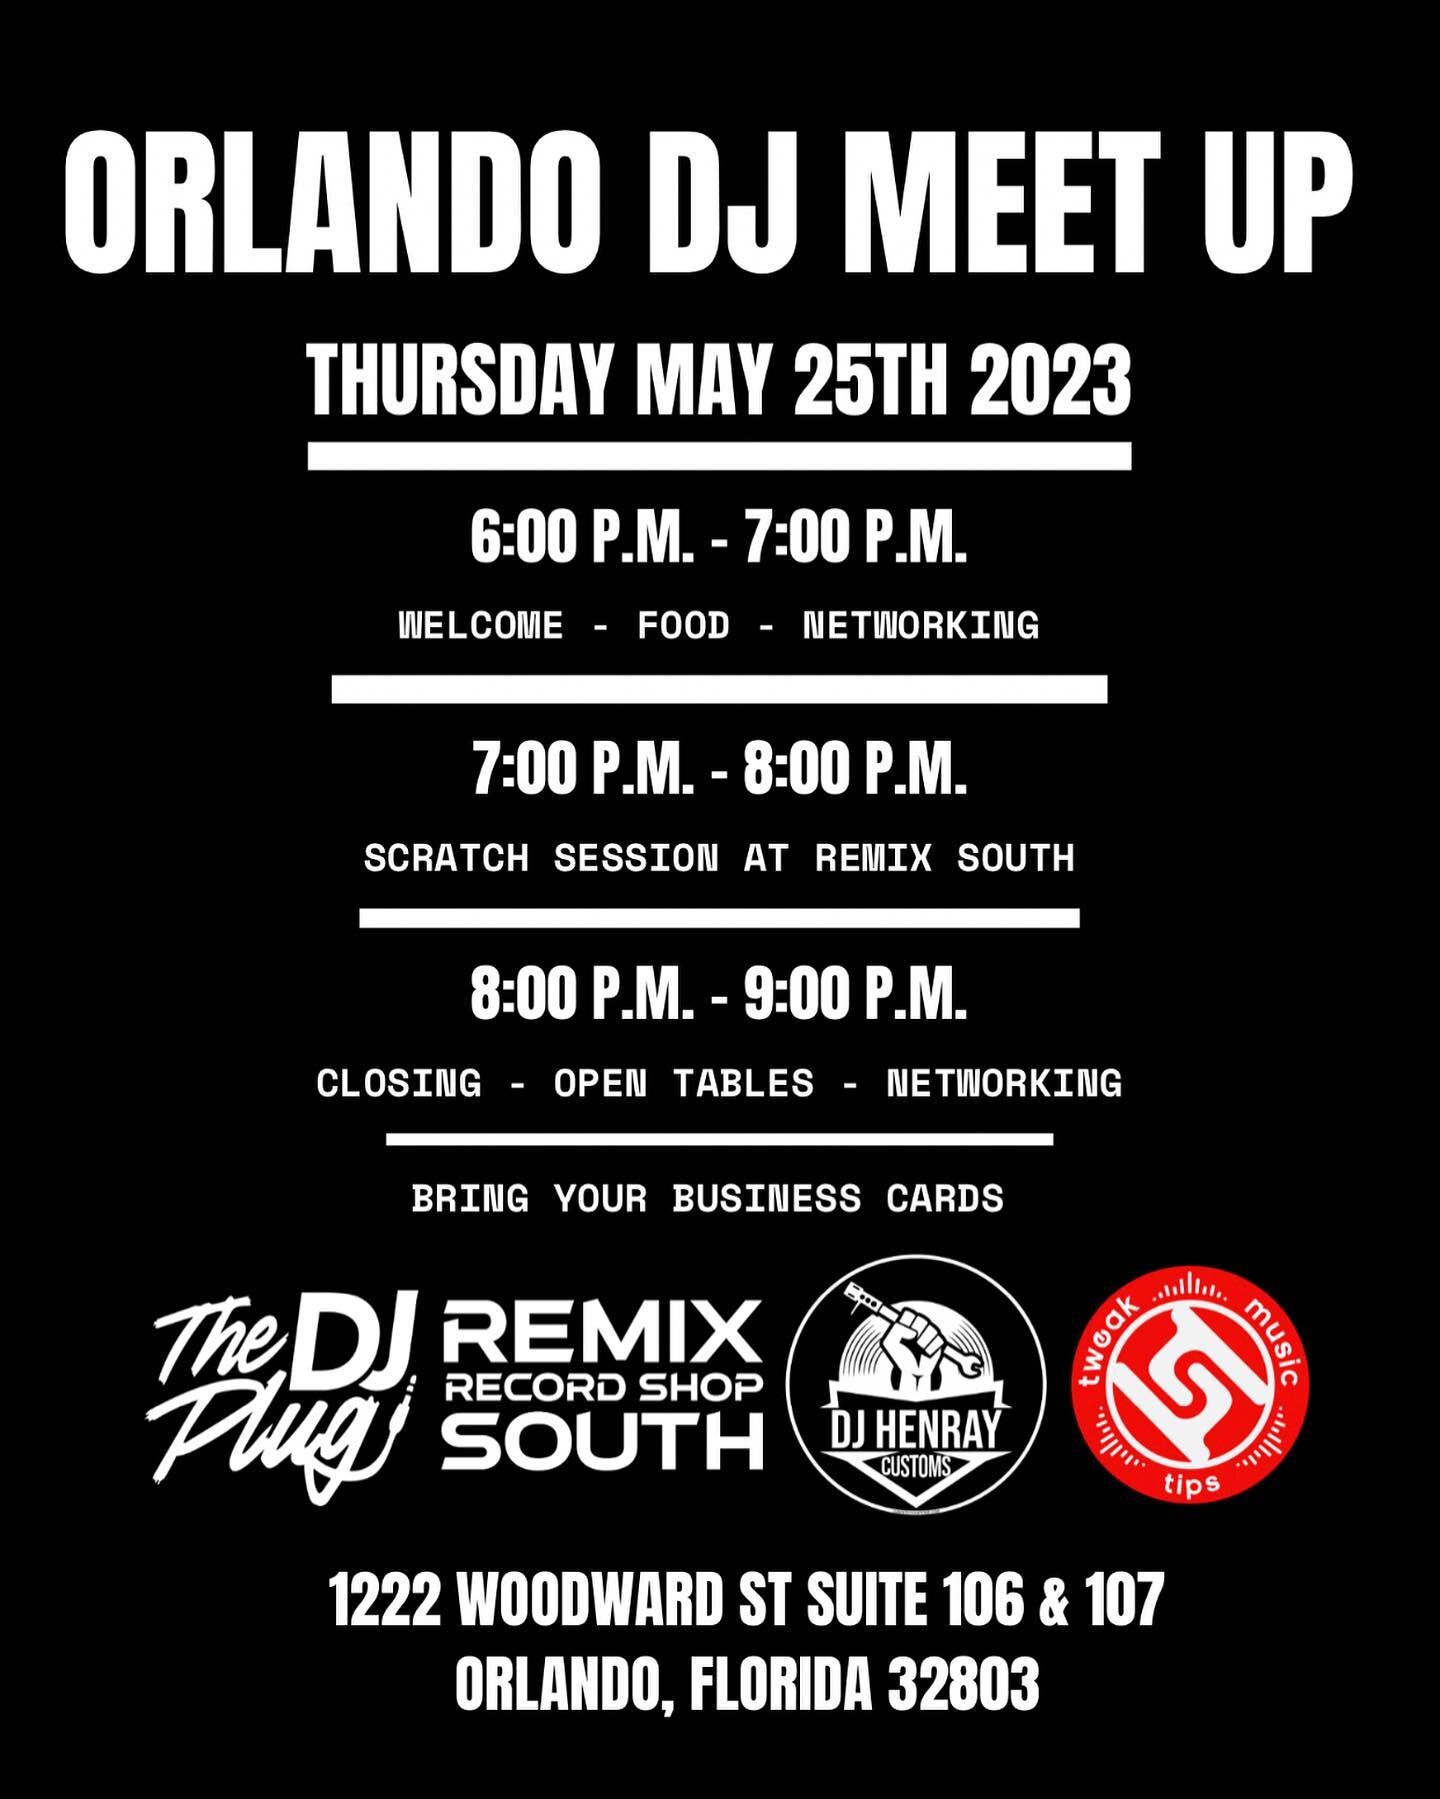 Your Attention Please! 📢📢🚨‼️ 
We are excited to announce the @thedjplug next store to @remixrecordshopsouth for a DJ meet up this Thursday May 25th! Come join both shops and welcome The DJ Plug to the neighborhood! 👏🔊🎧🙌 
1222 Woodward St.
Unit